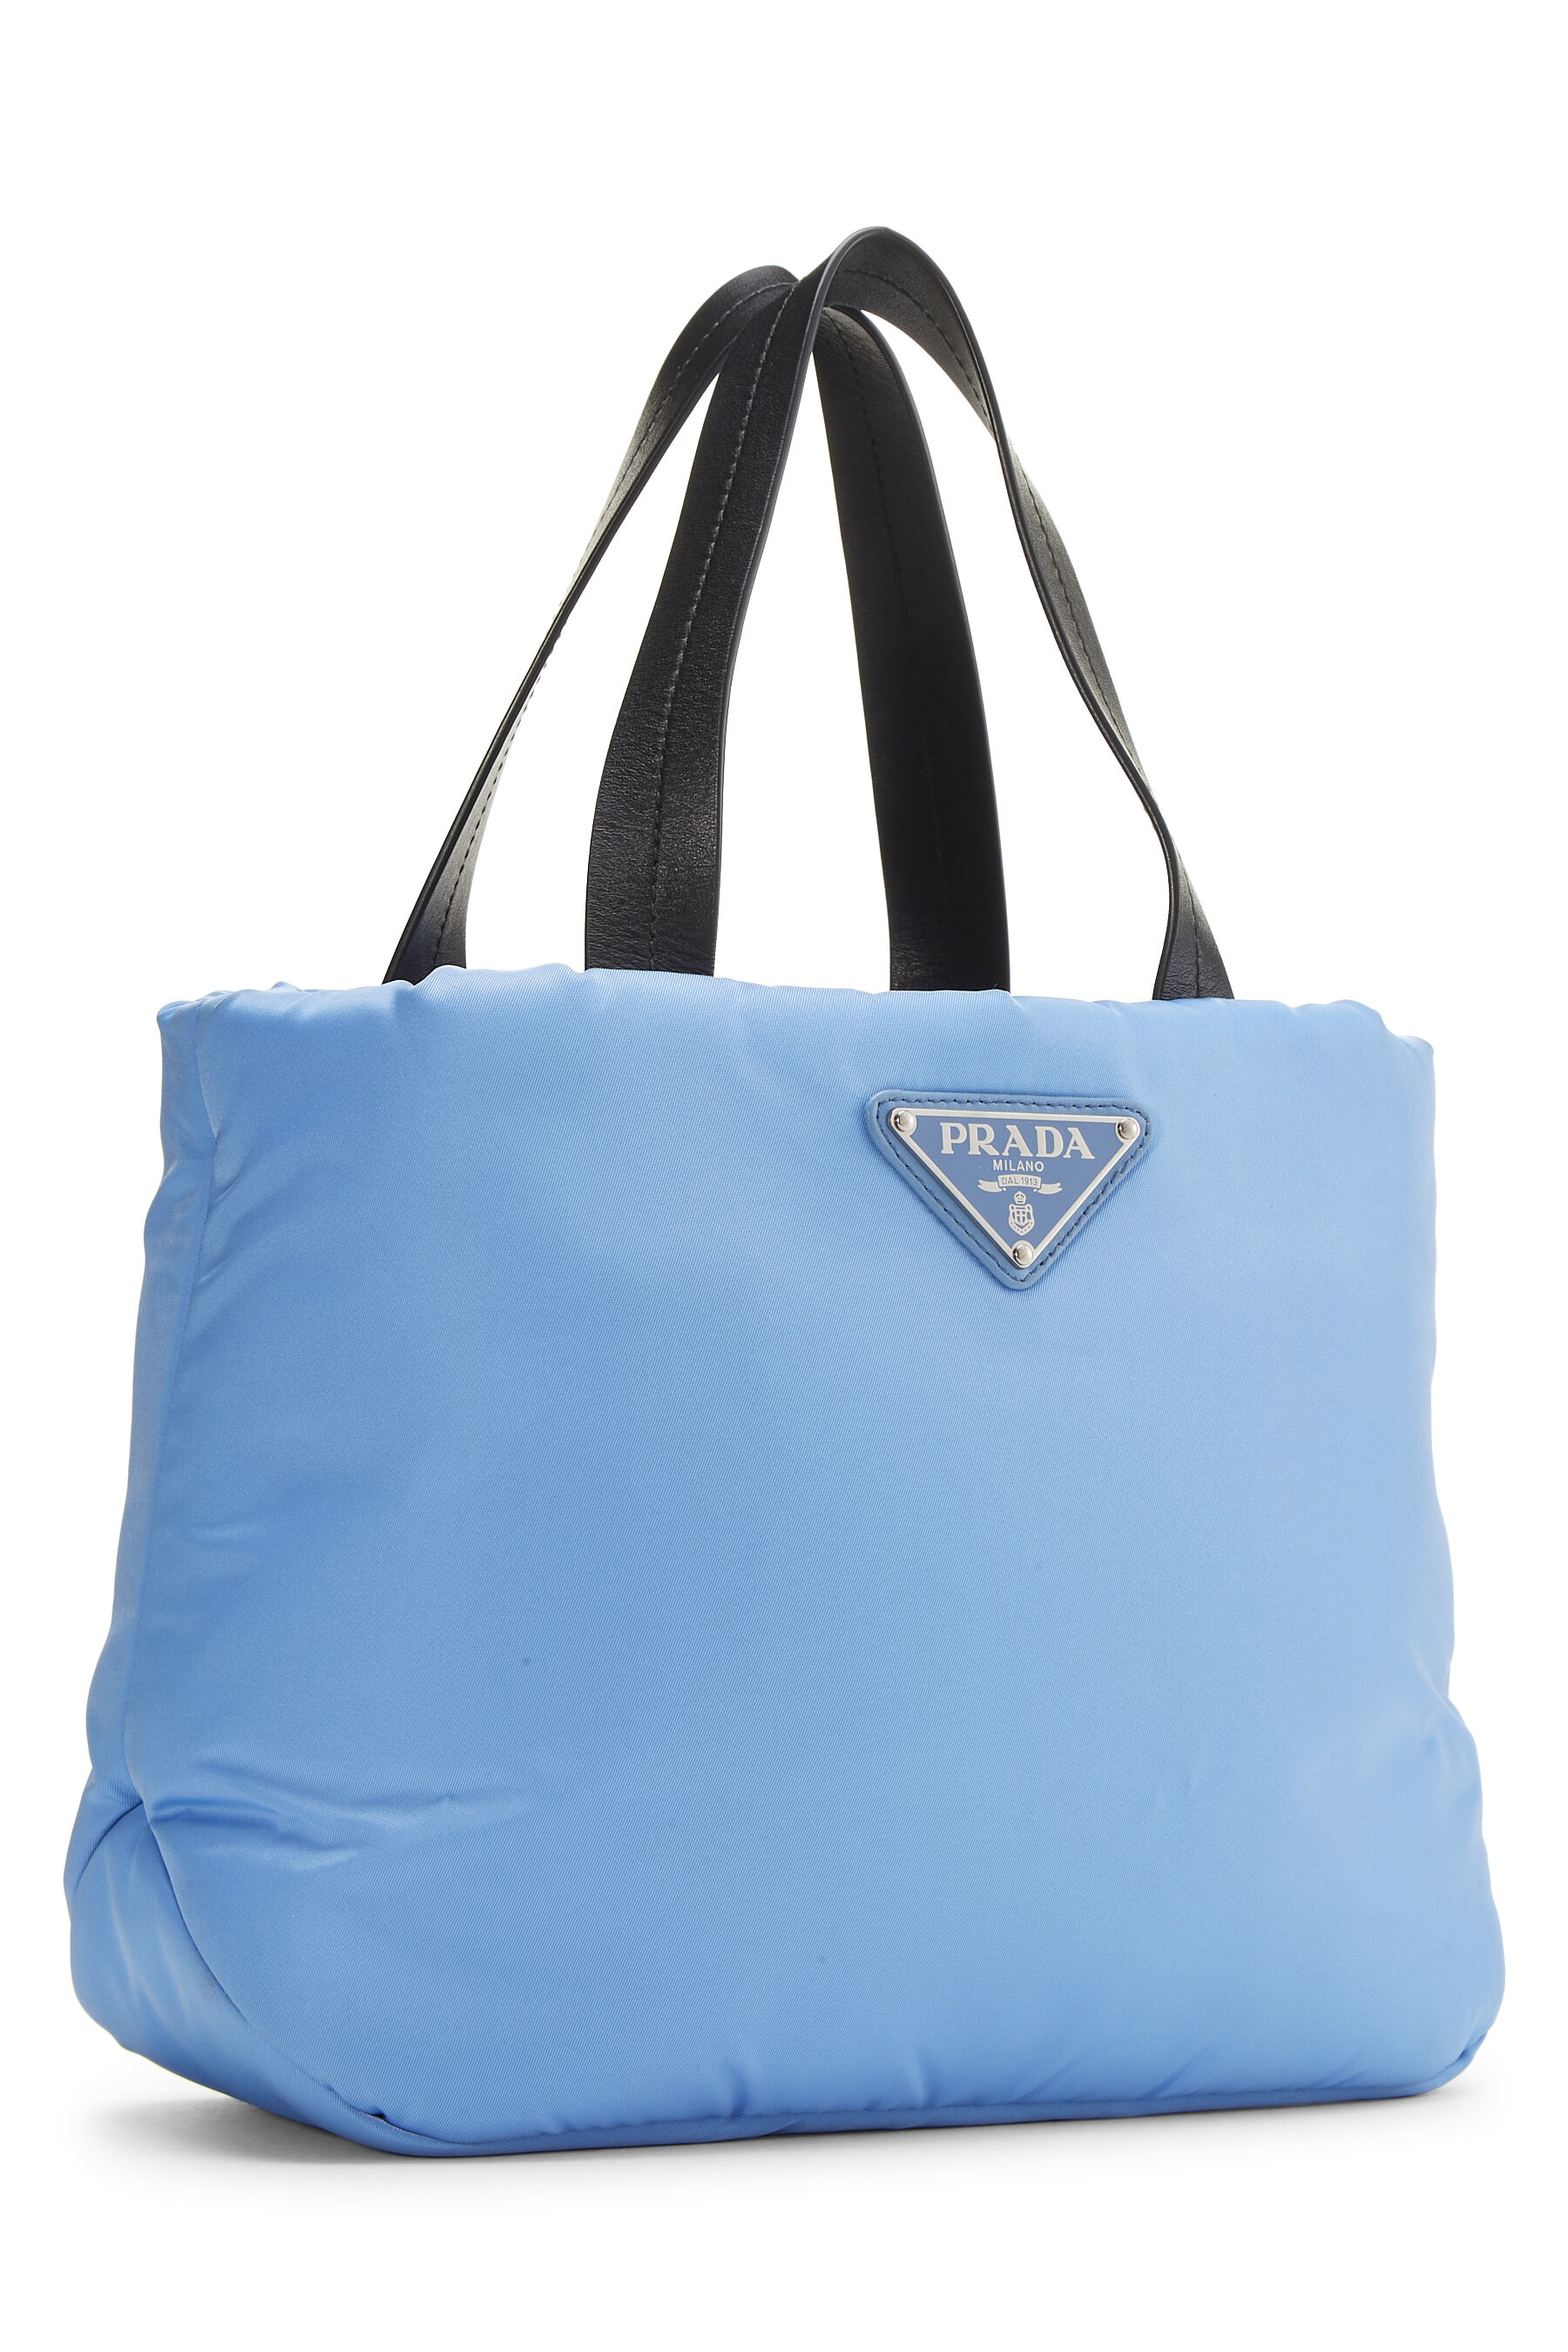 PRADA PADDED NYLON TOTE REVIEW - the best luxury travel tote - Mytheresa  unboxing